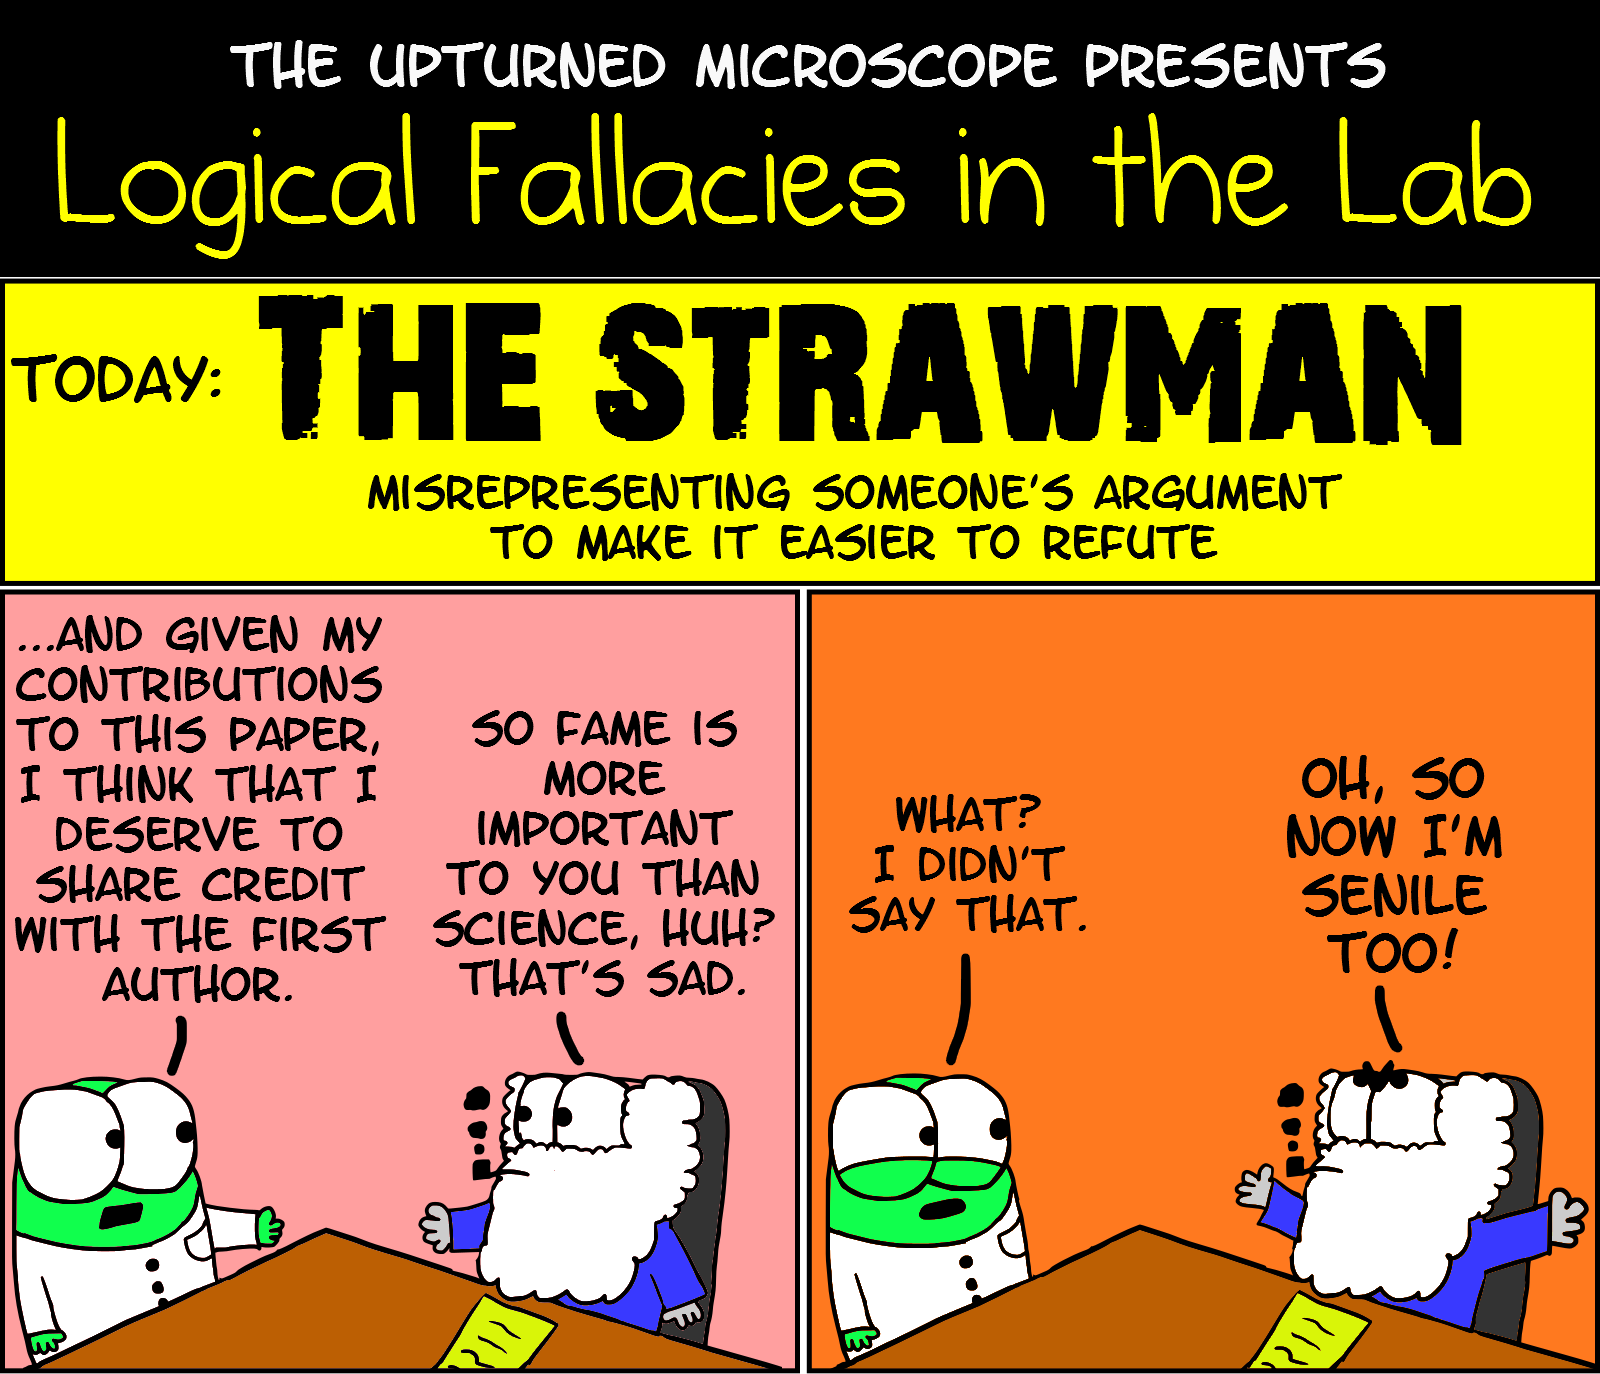 Your Fallacy Is: Strawman (Addressing a made up phony argument)